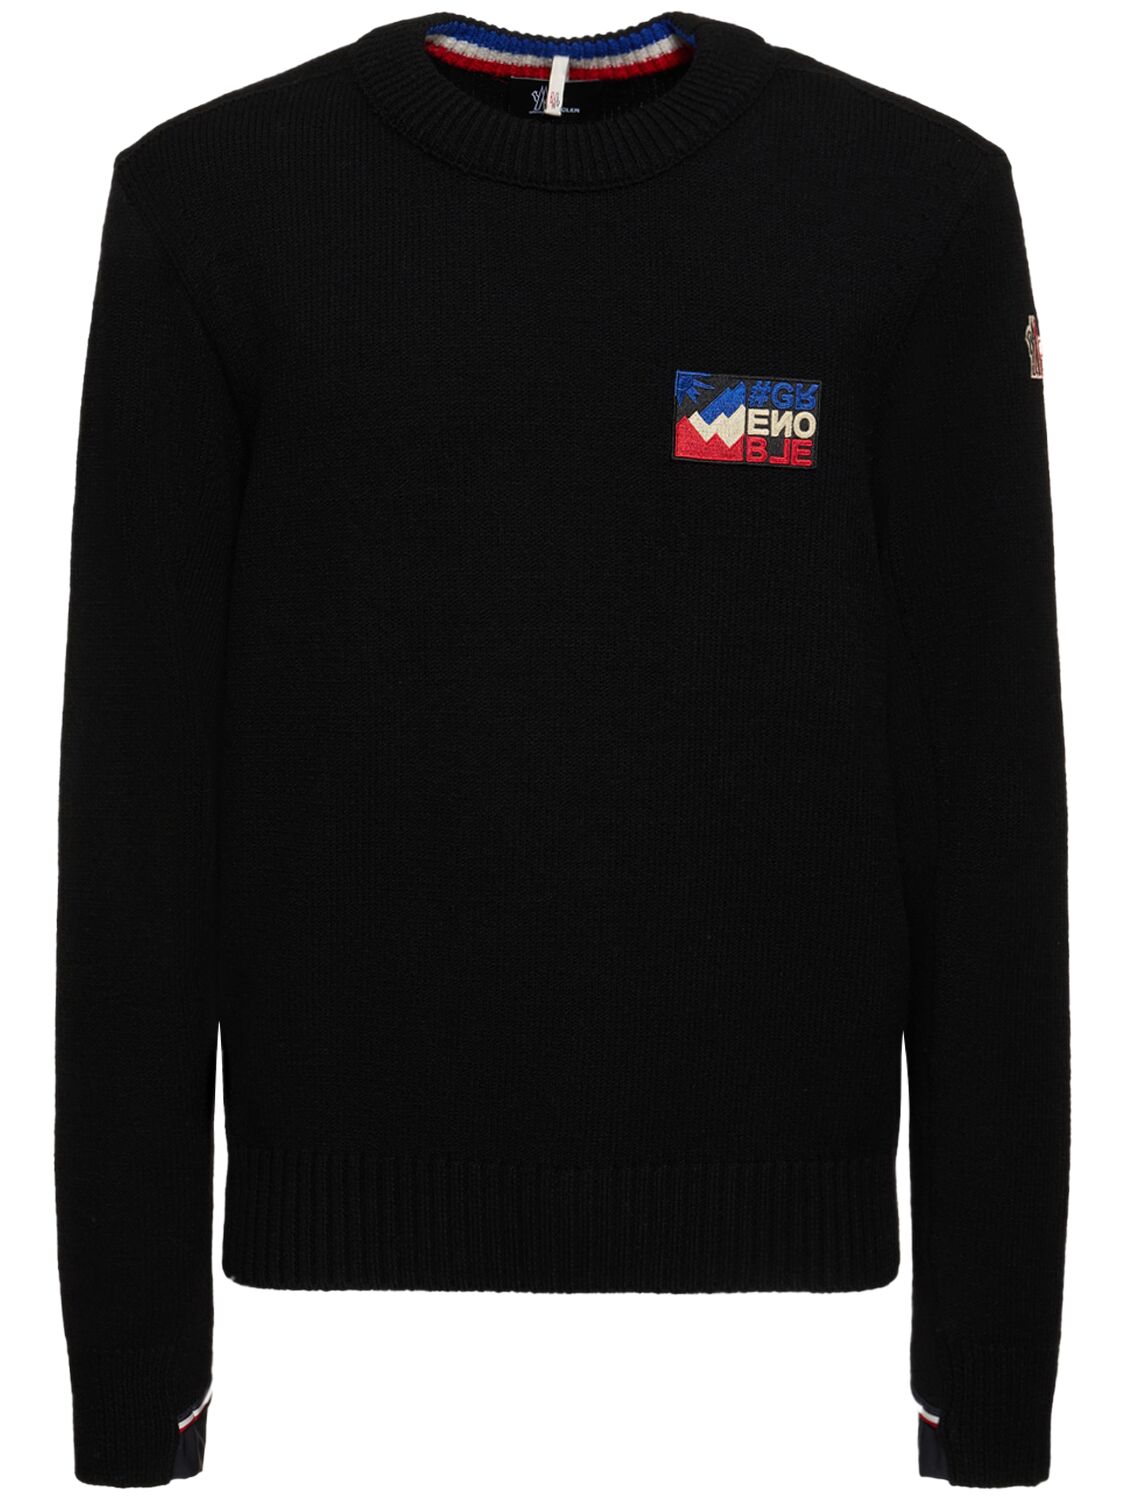 Image of Stretch Wool Blend Crewneck Sweater